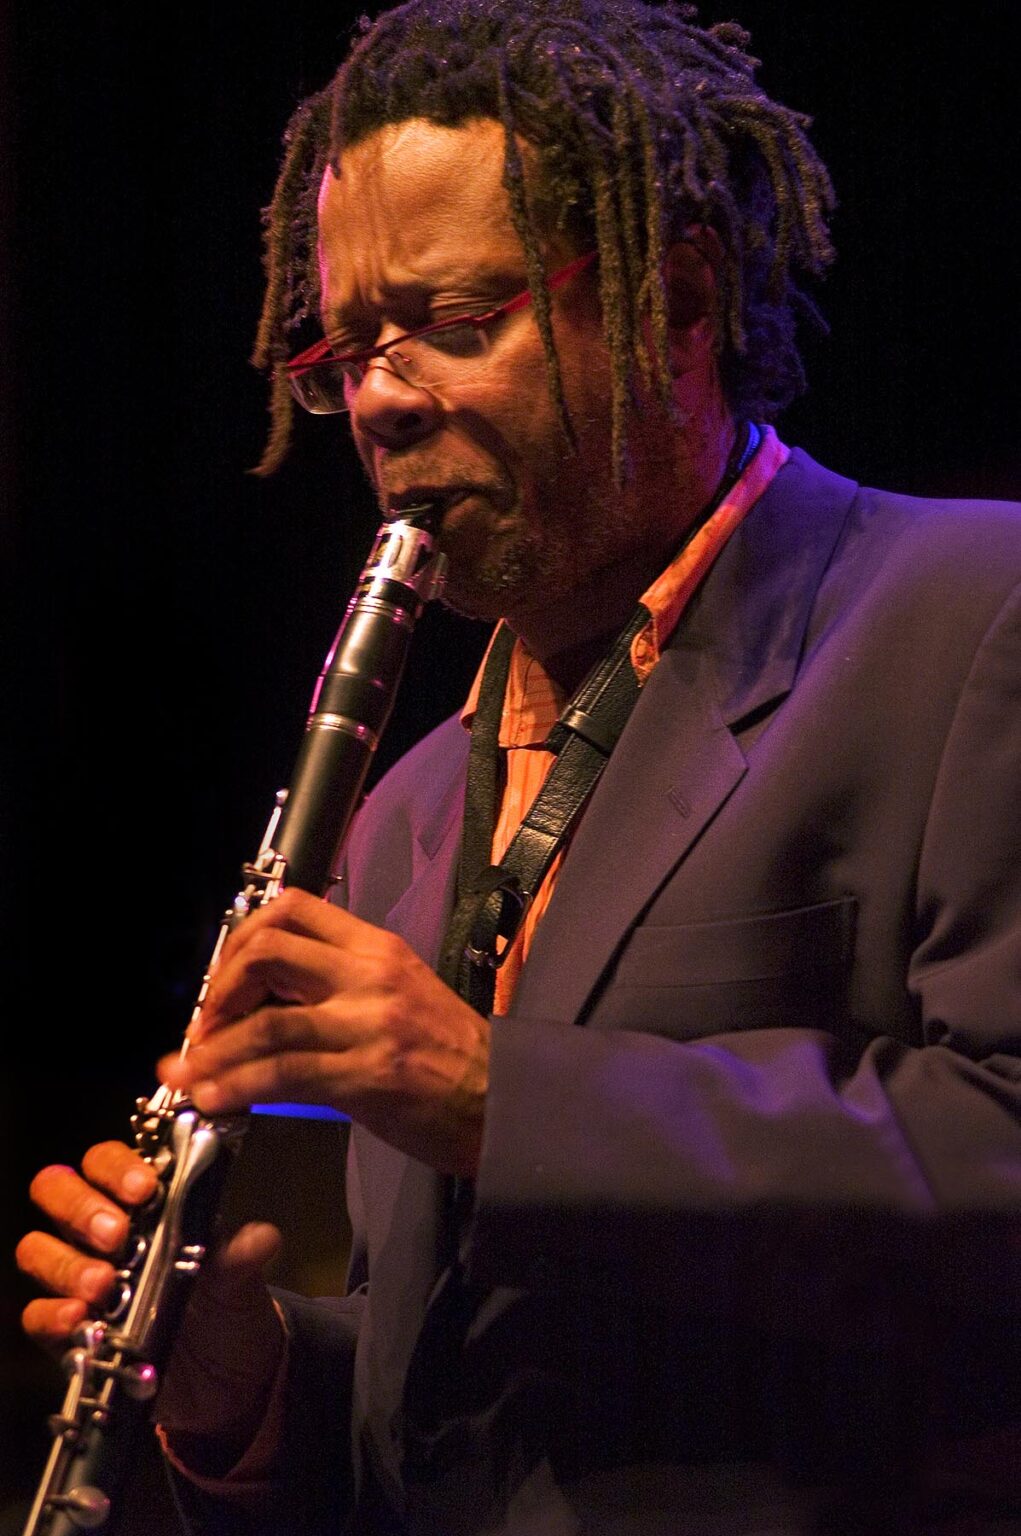 DON BYRON plays the clarinet at the MONTEREY JAZZ FESTIVAL - CALIFORNIA